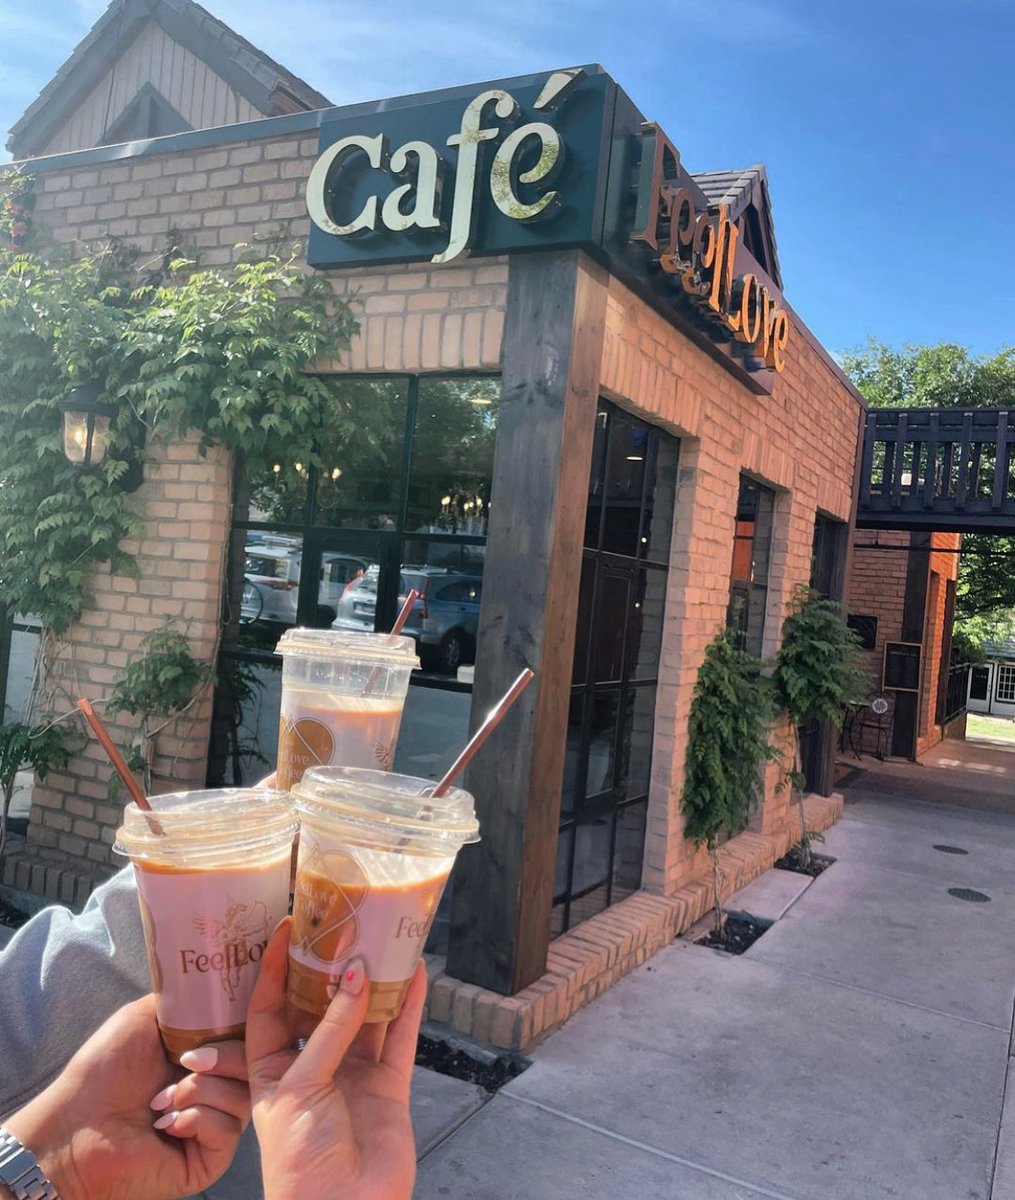 Brunch at Feellove! Choose between 6 locations scattered from Snow Canyon state park to Zion National Park and Loveland, CO.